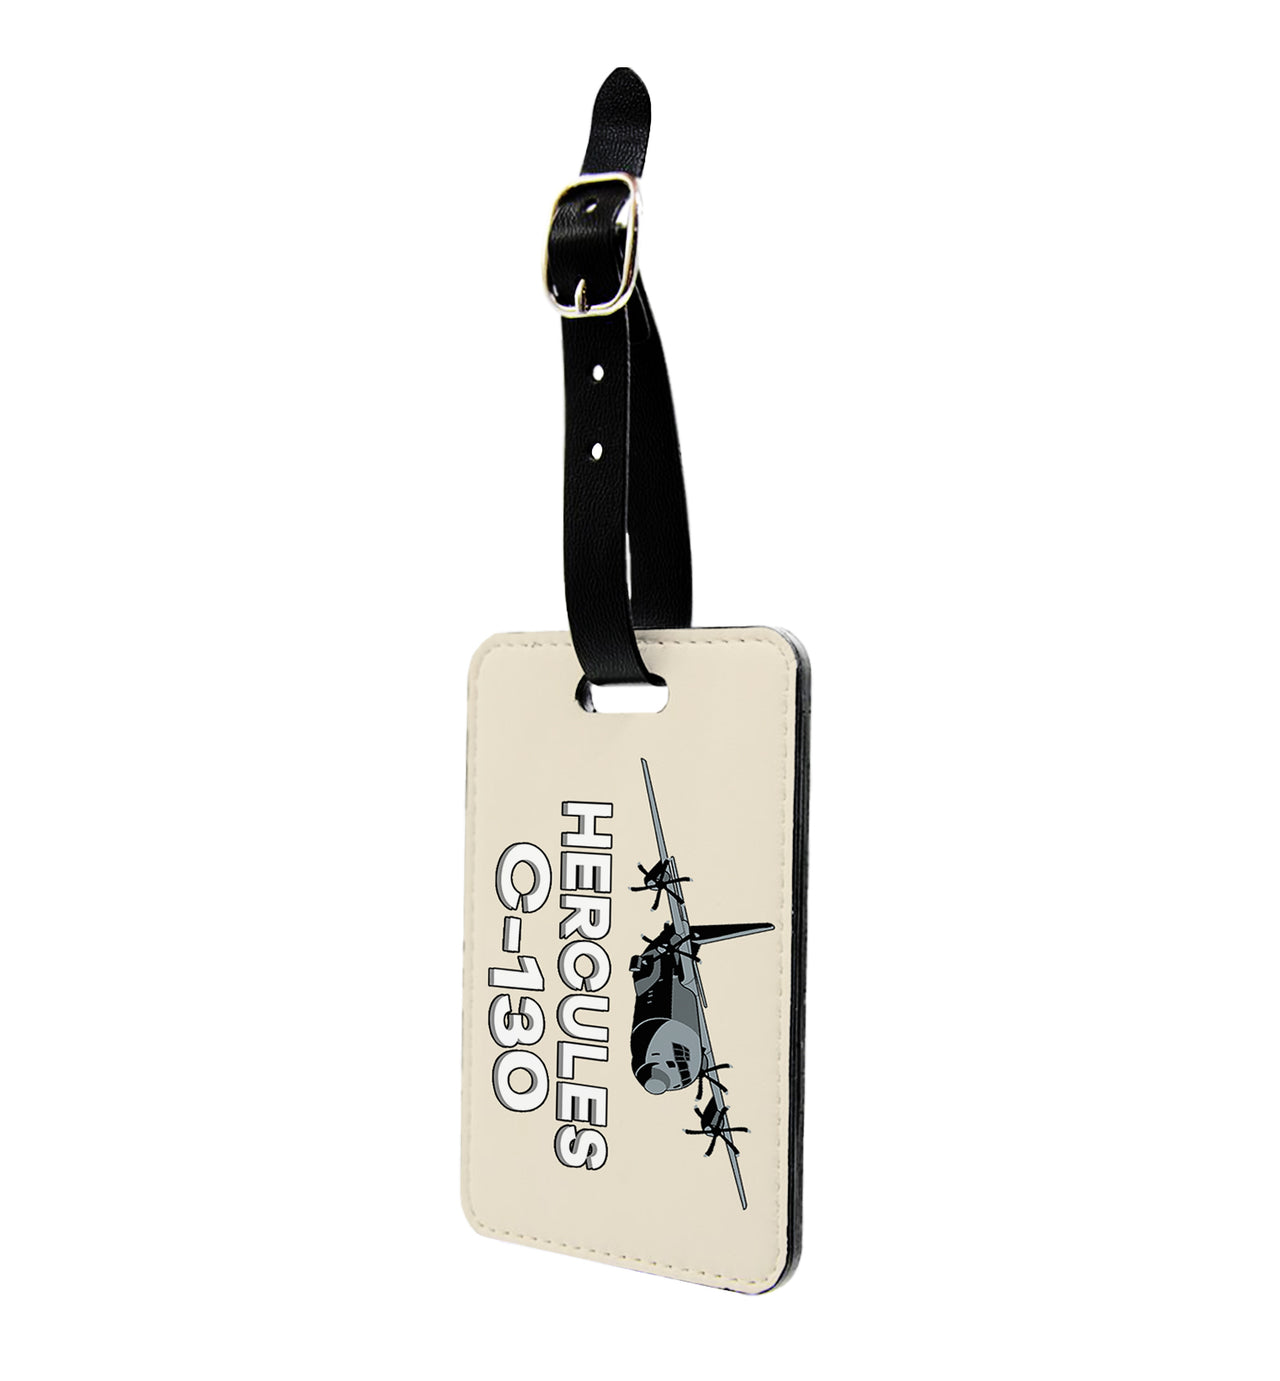 The Hercules C130 Designed Luggage Tag